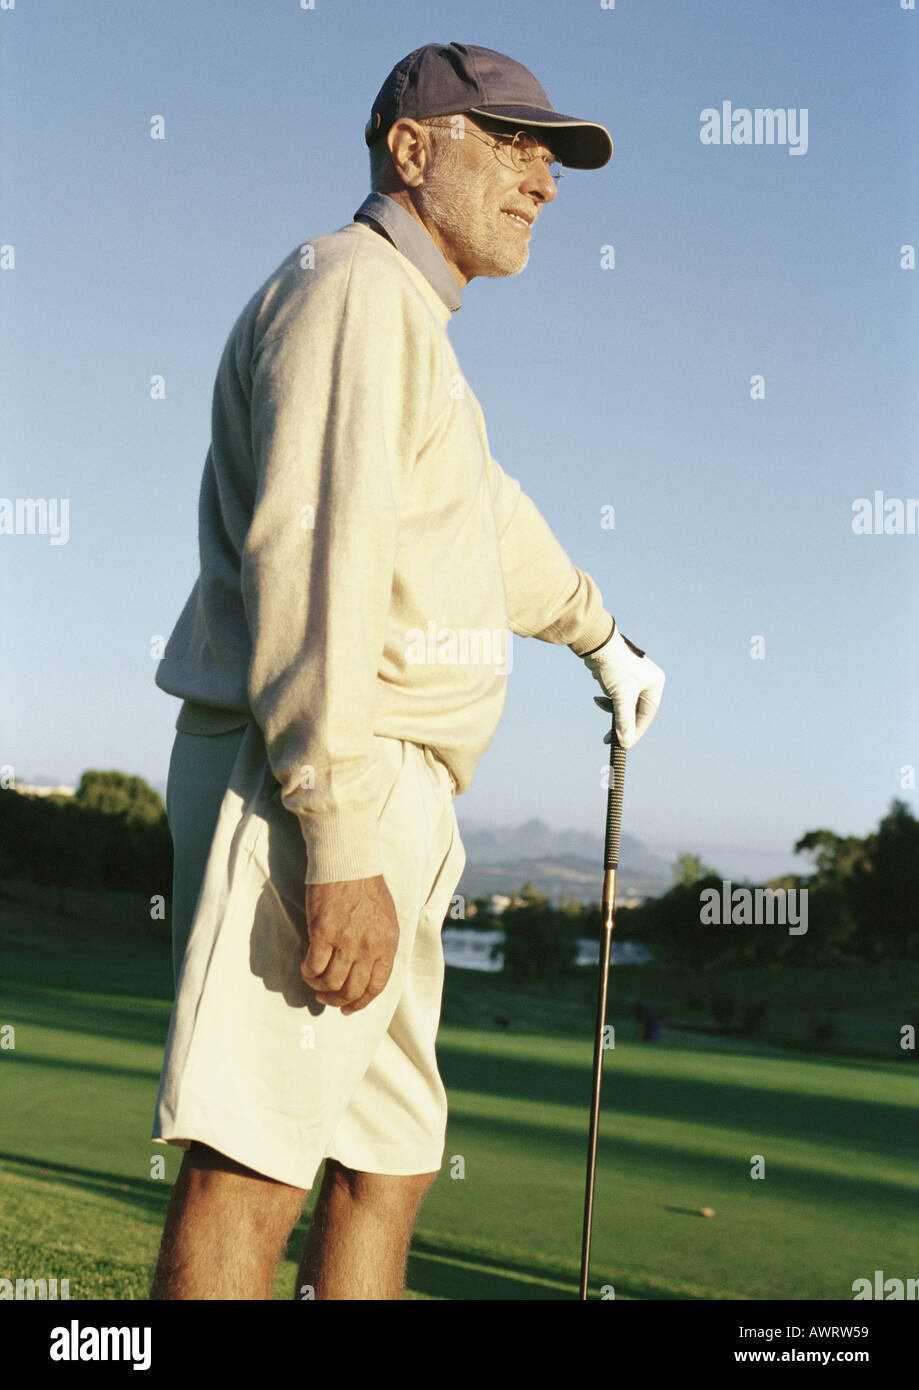 Young man leaning on golf club Banque D'Images